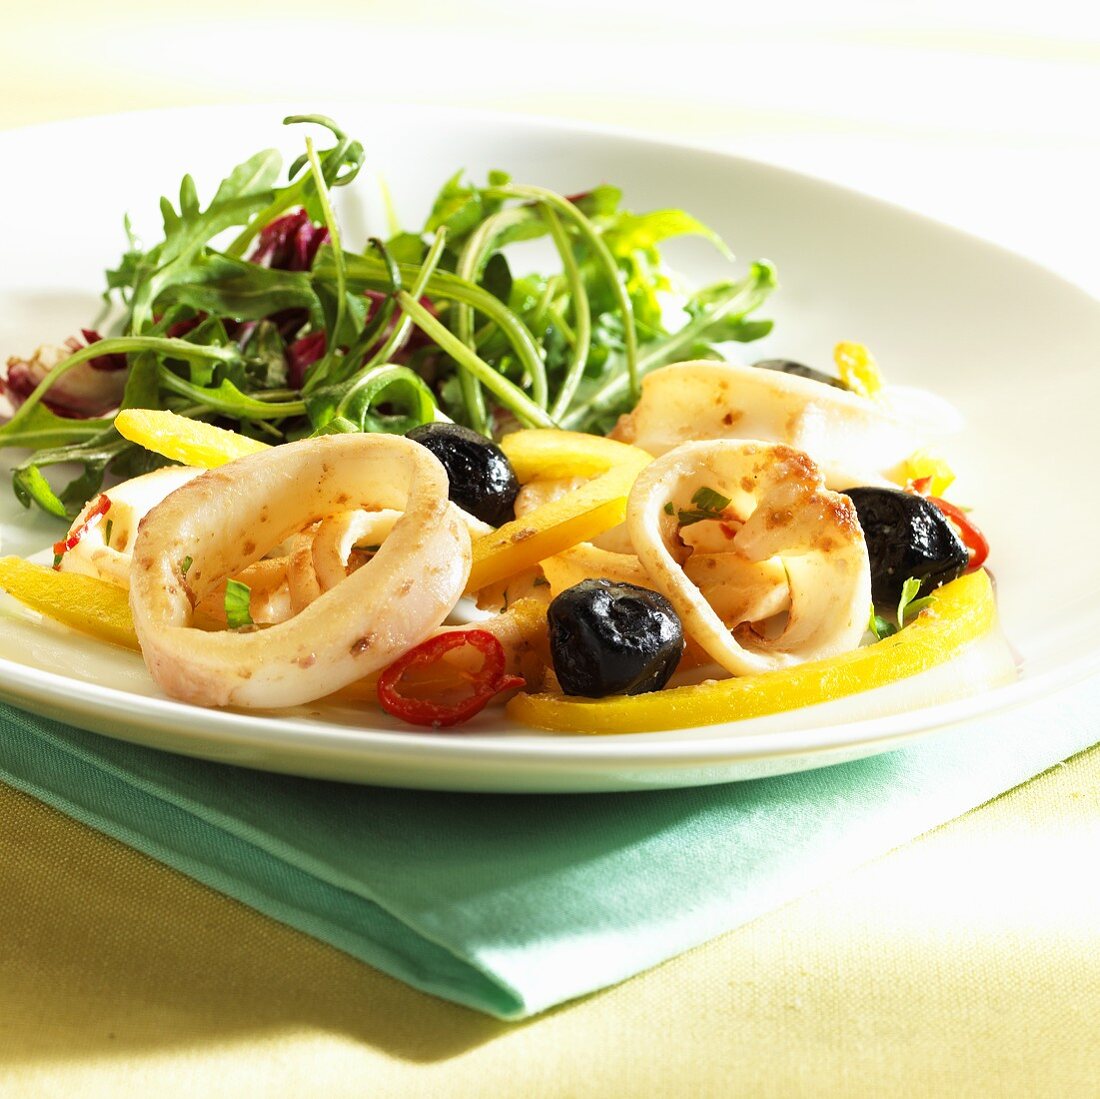 Squid salad with olives and peppers